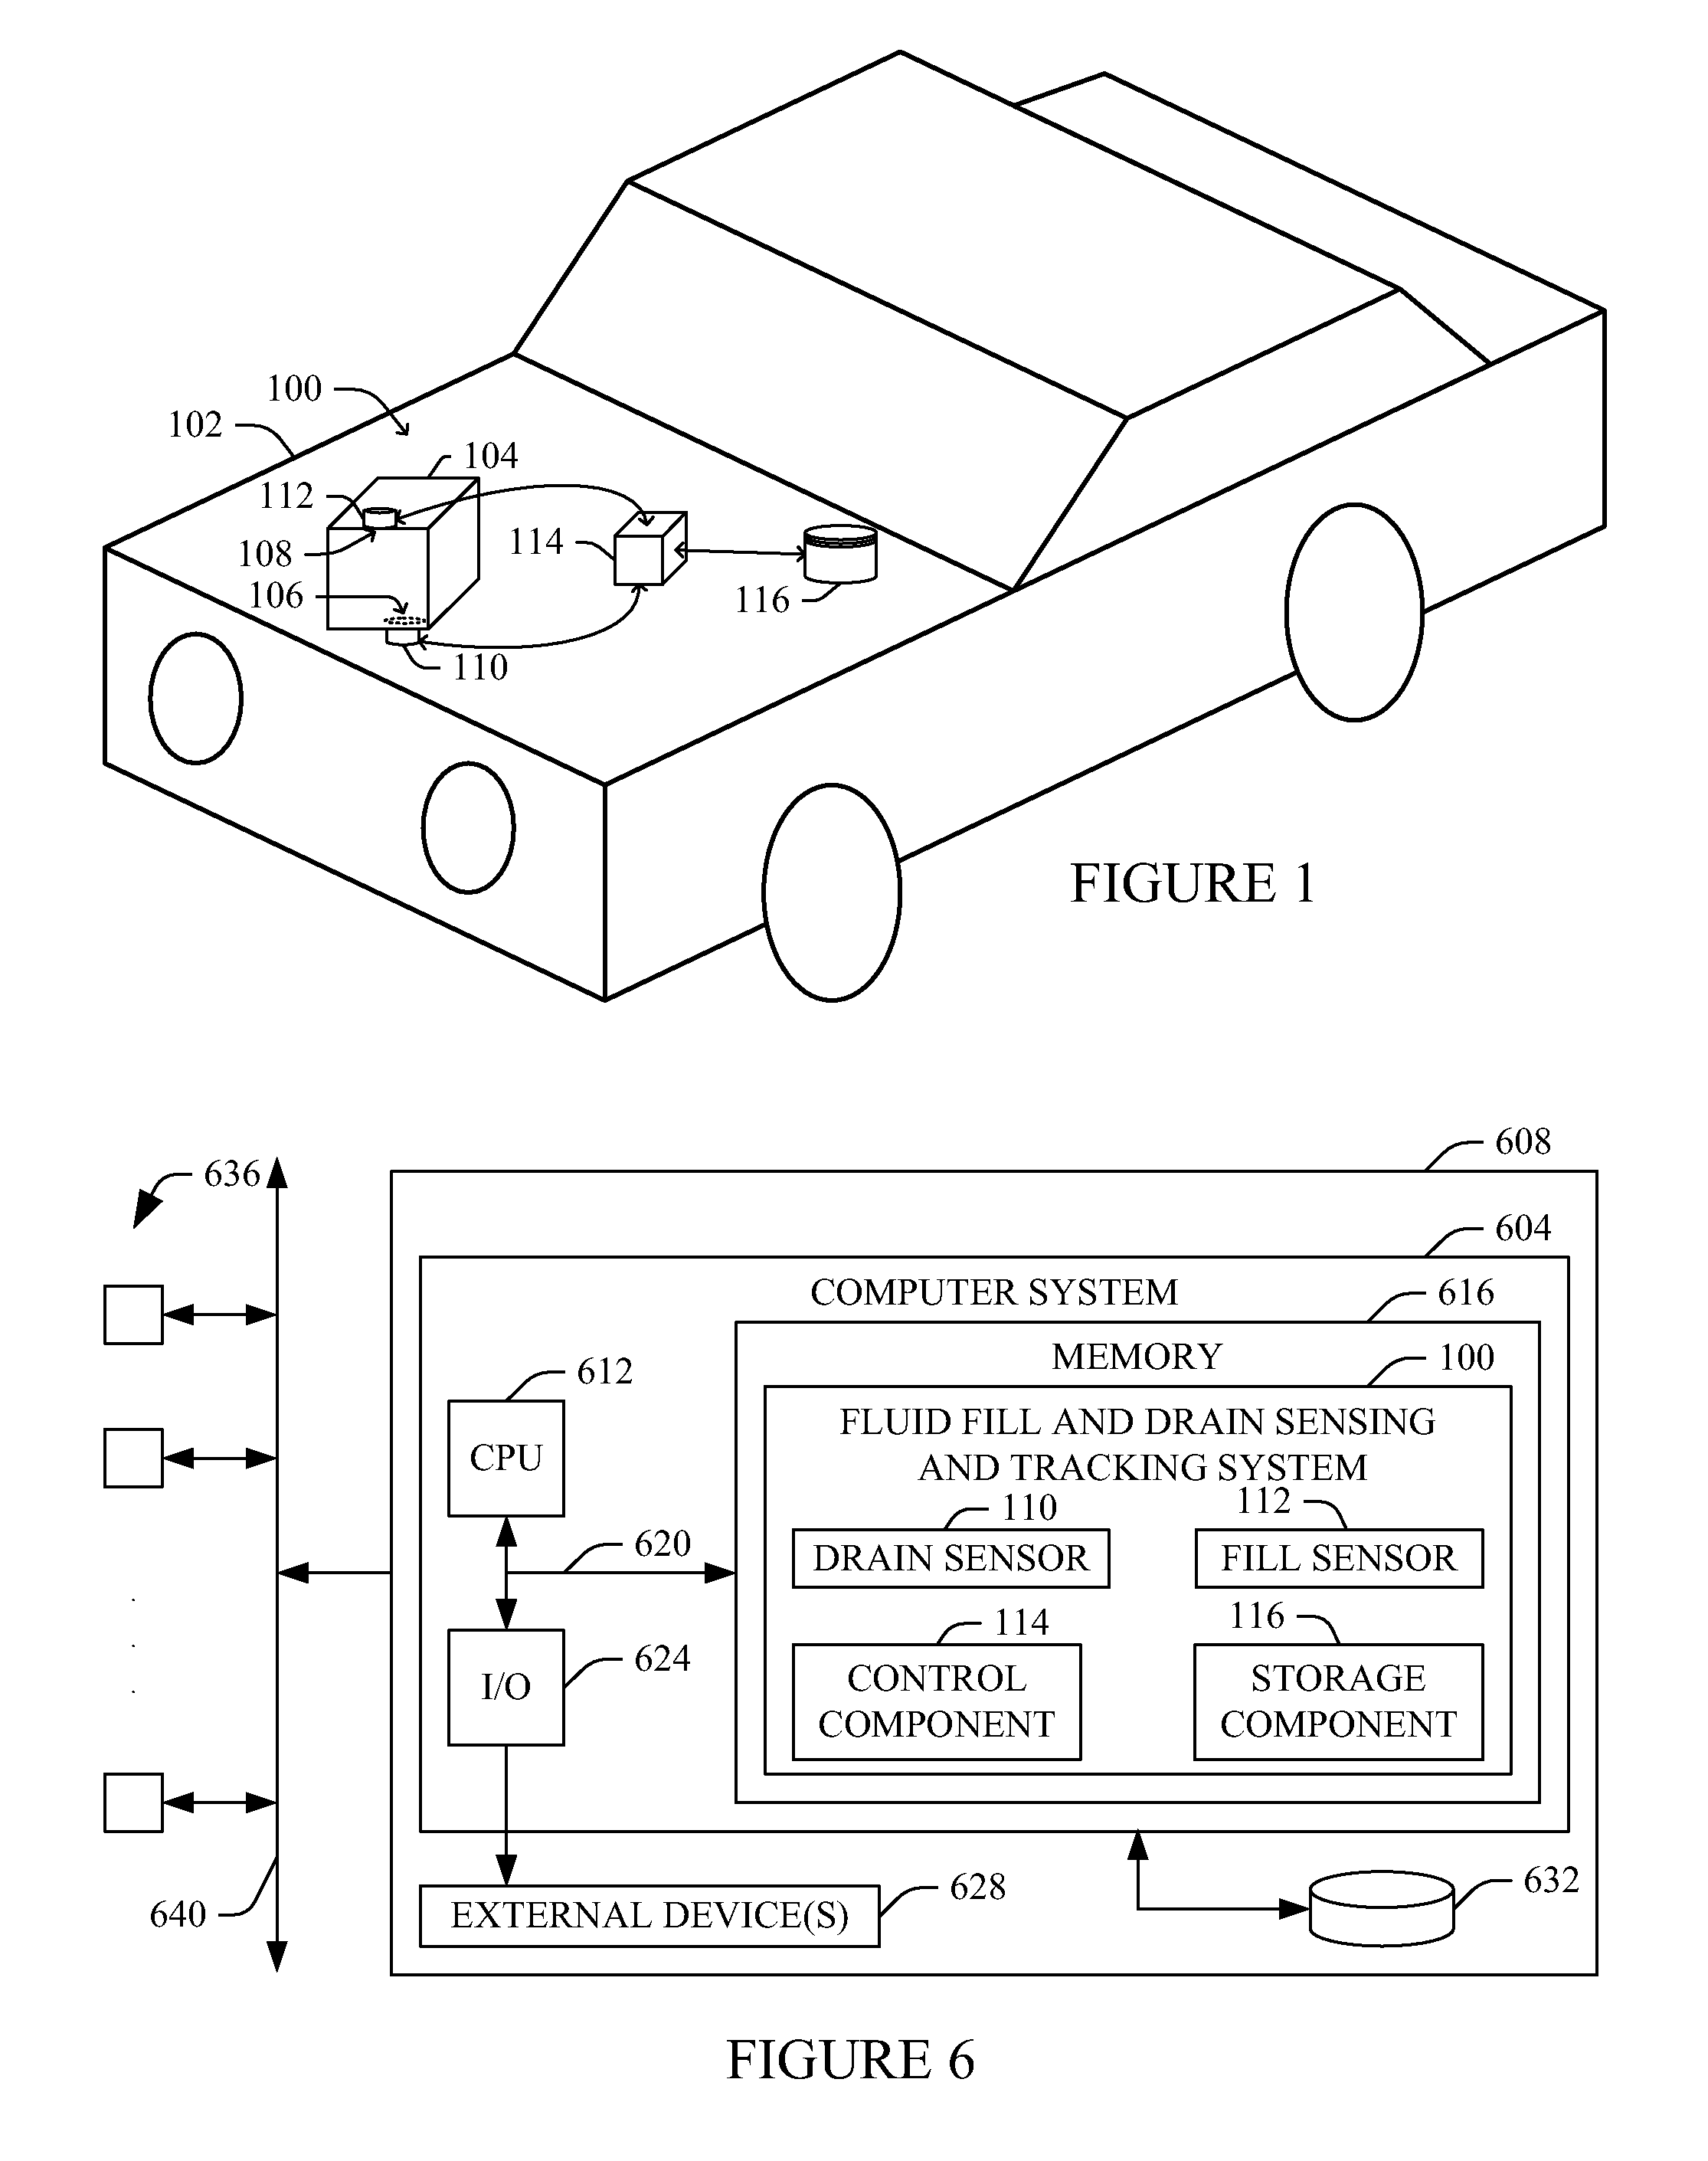 Vehicle fluid replacement tracking method, system, and program product